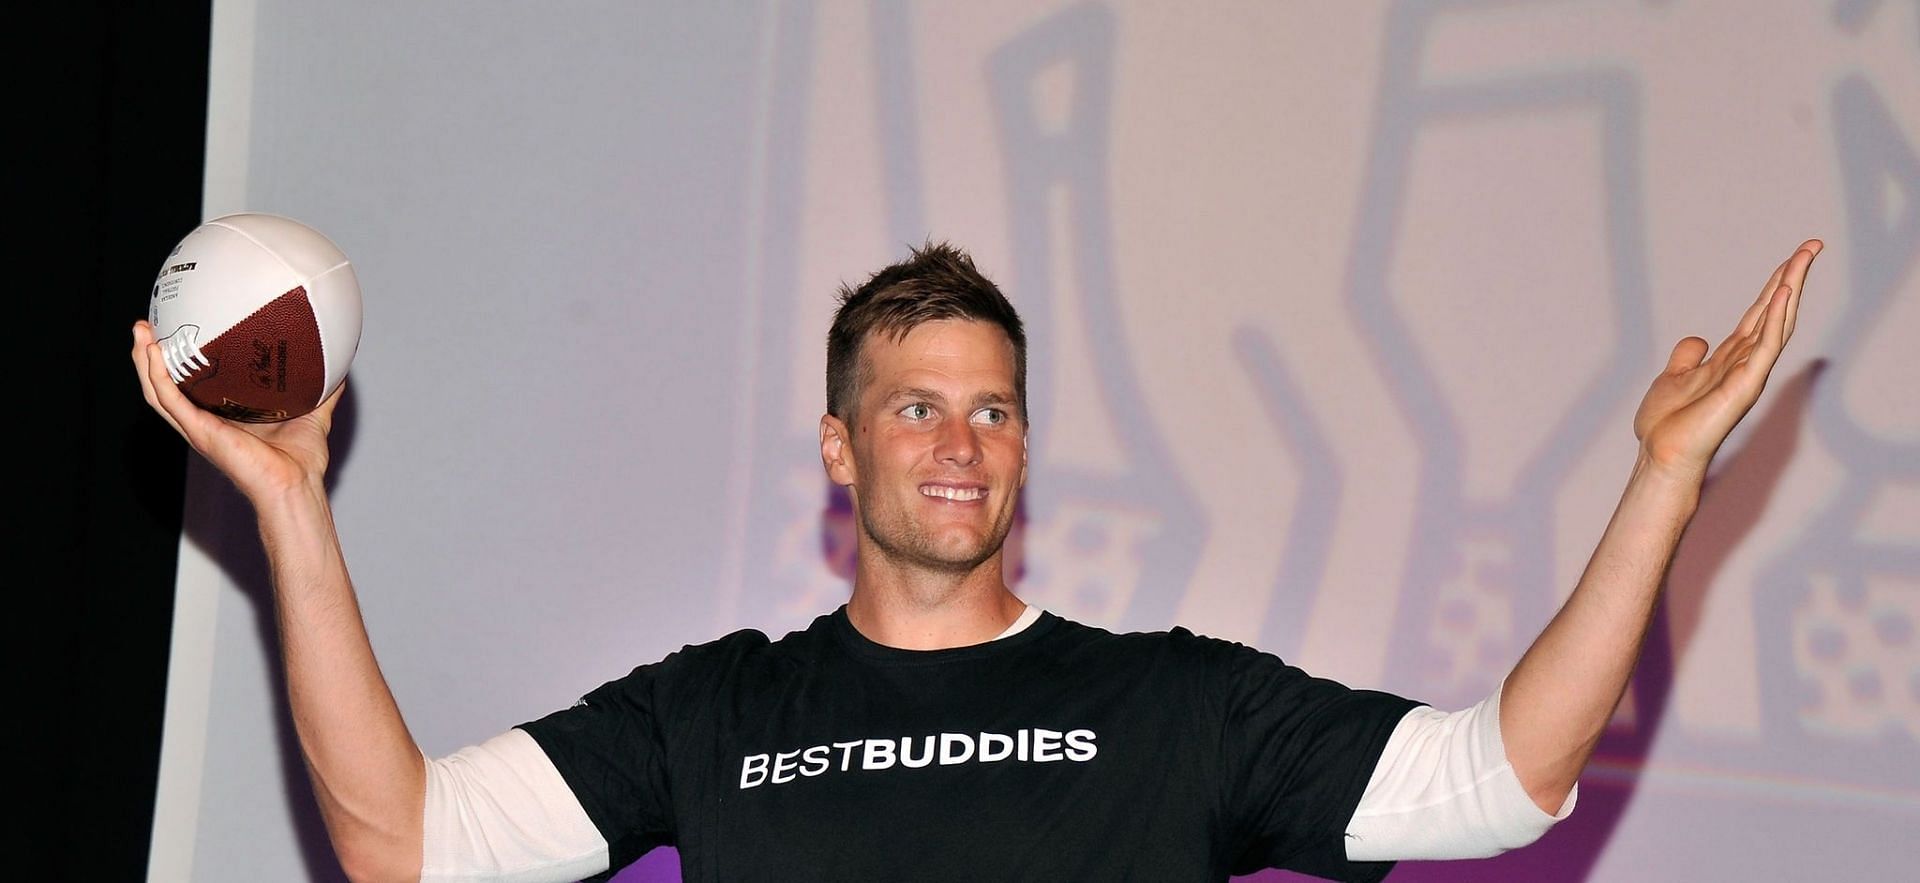 Tom Brady has officially announced his retirement from NFL after 22 years (Image via Stephen Lovekin/Getty Images)